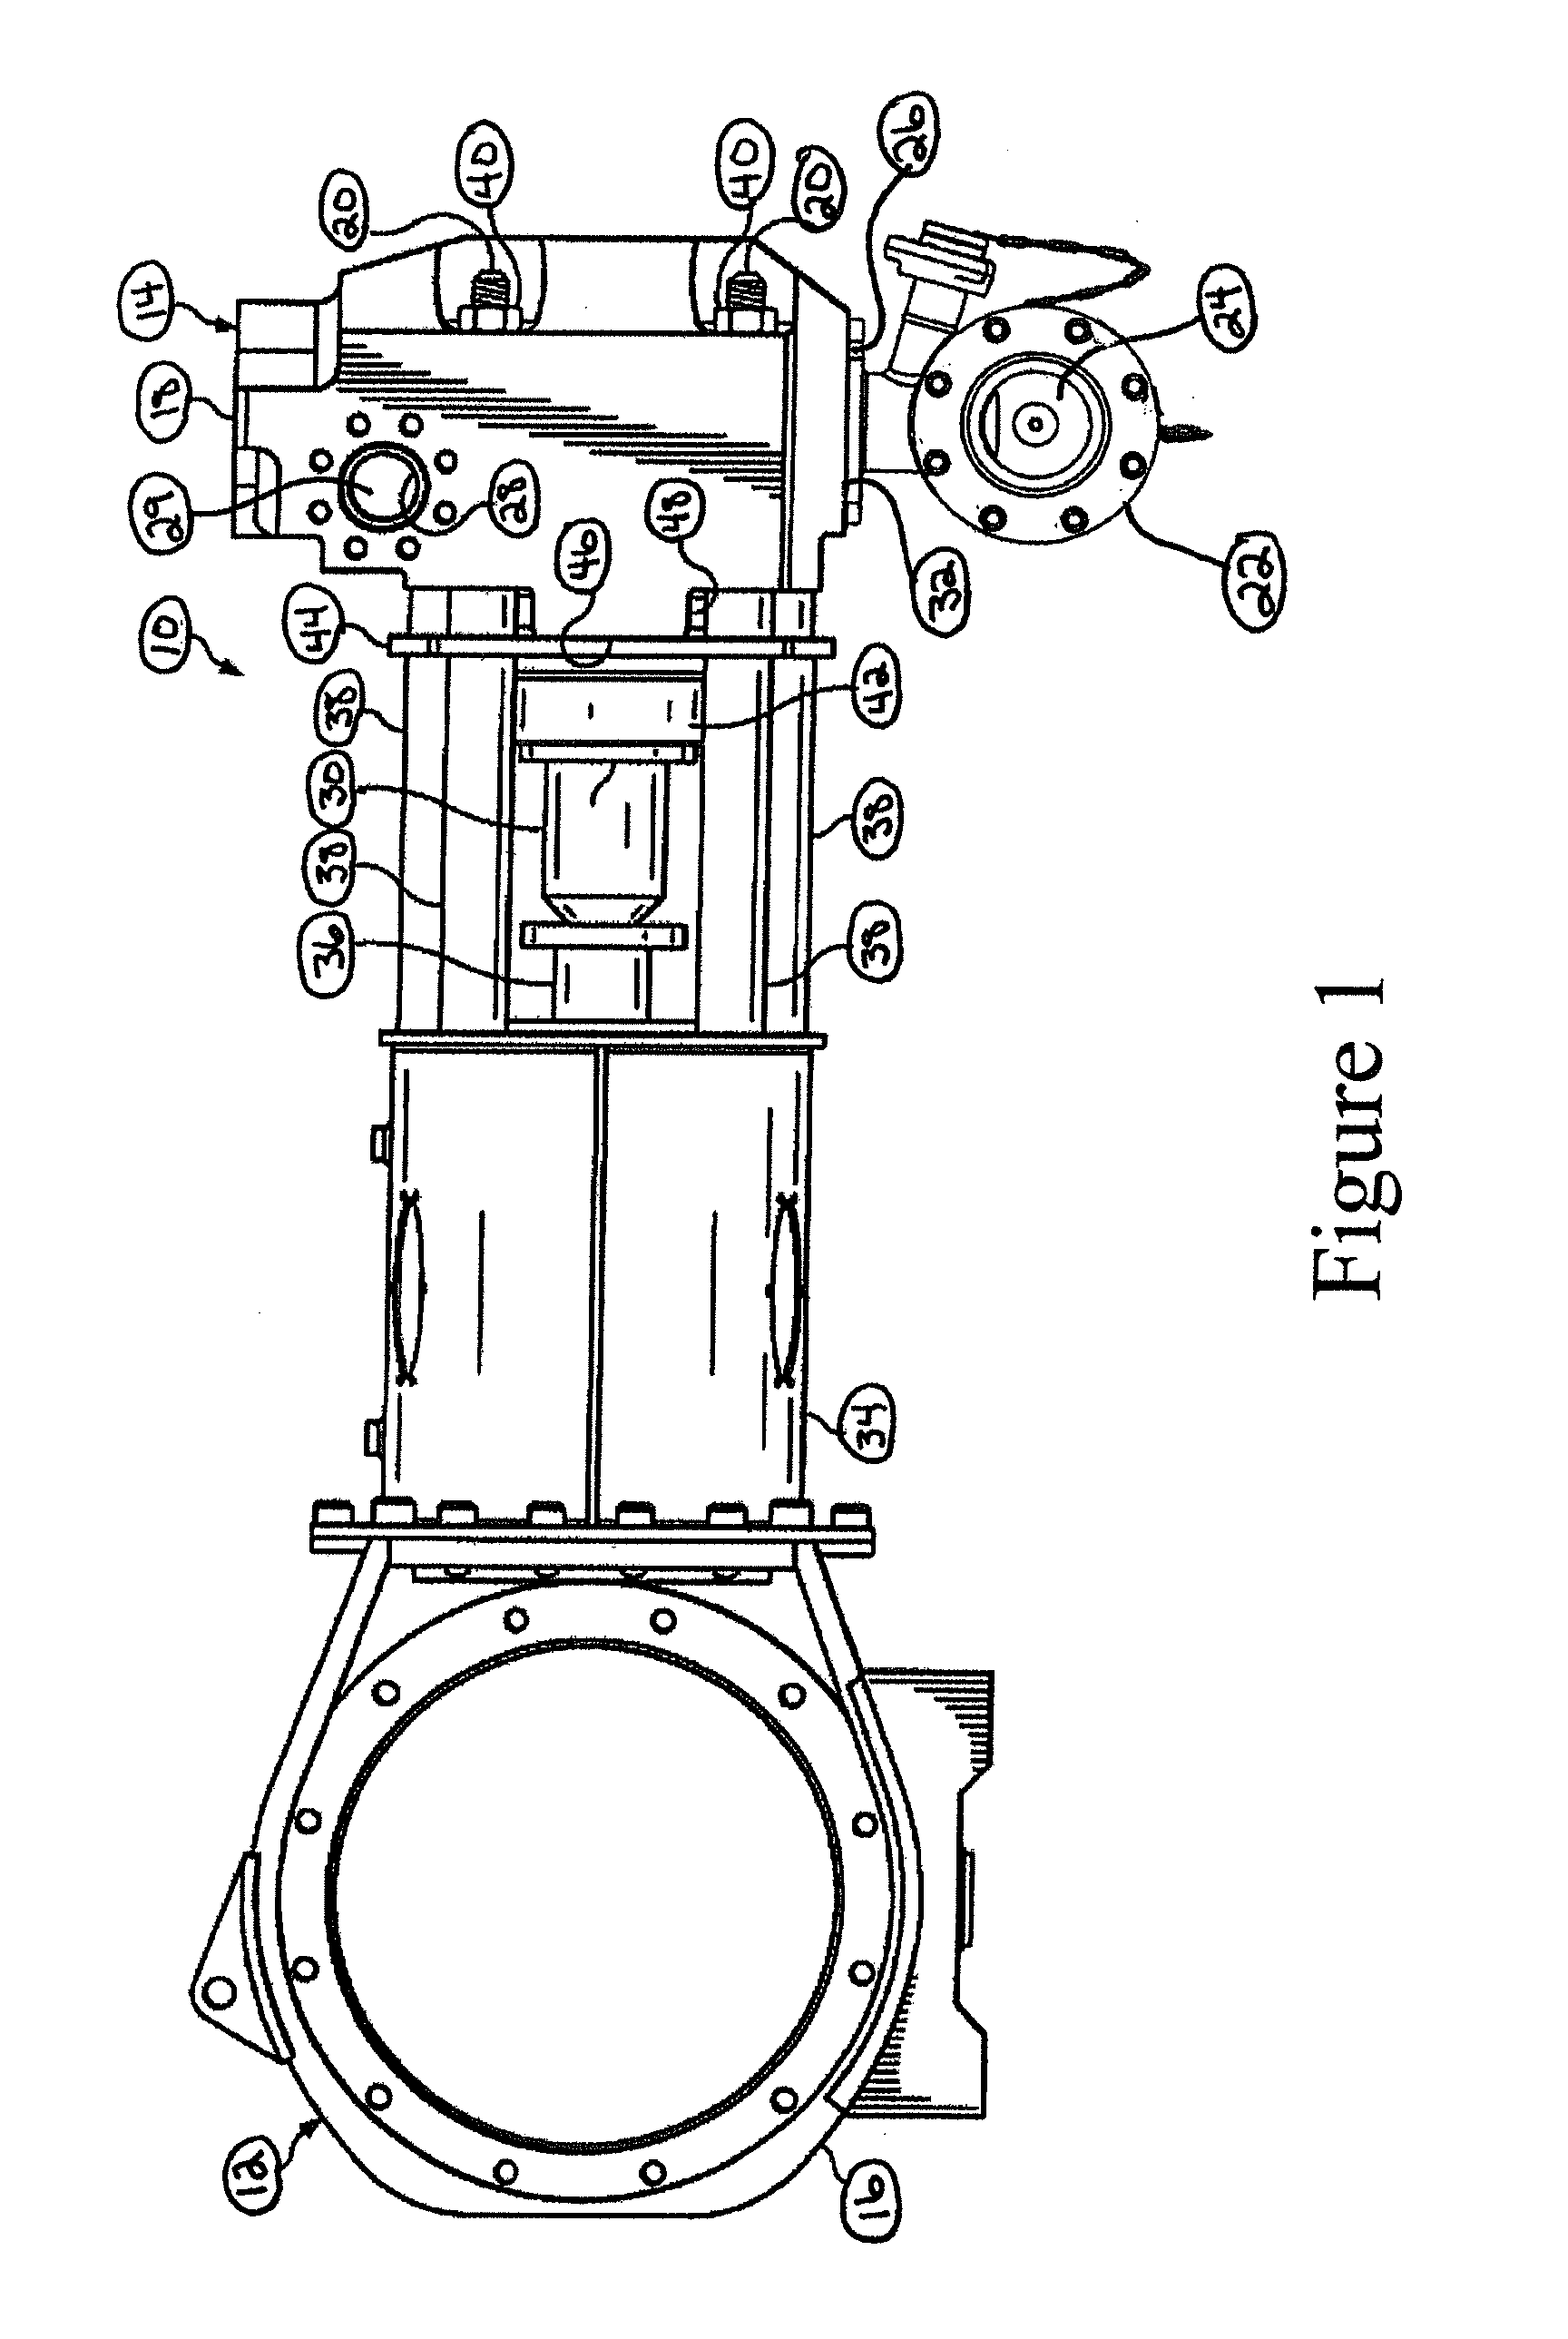 Fluid liner wear indicator for suction manifold of reciprocating pump assembly